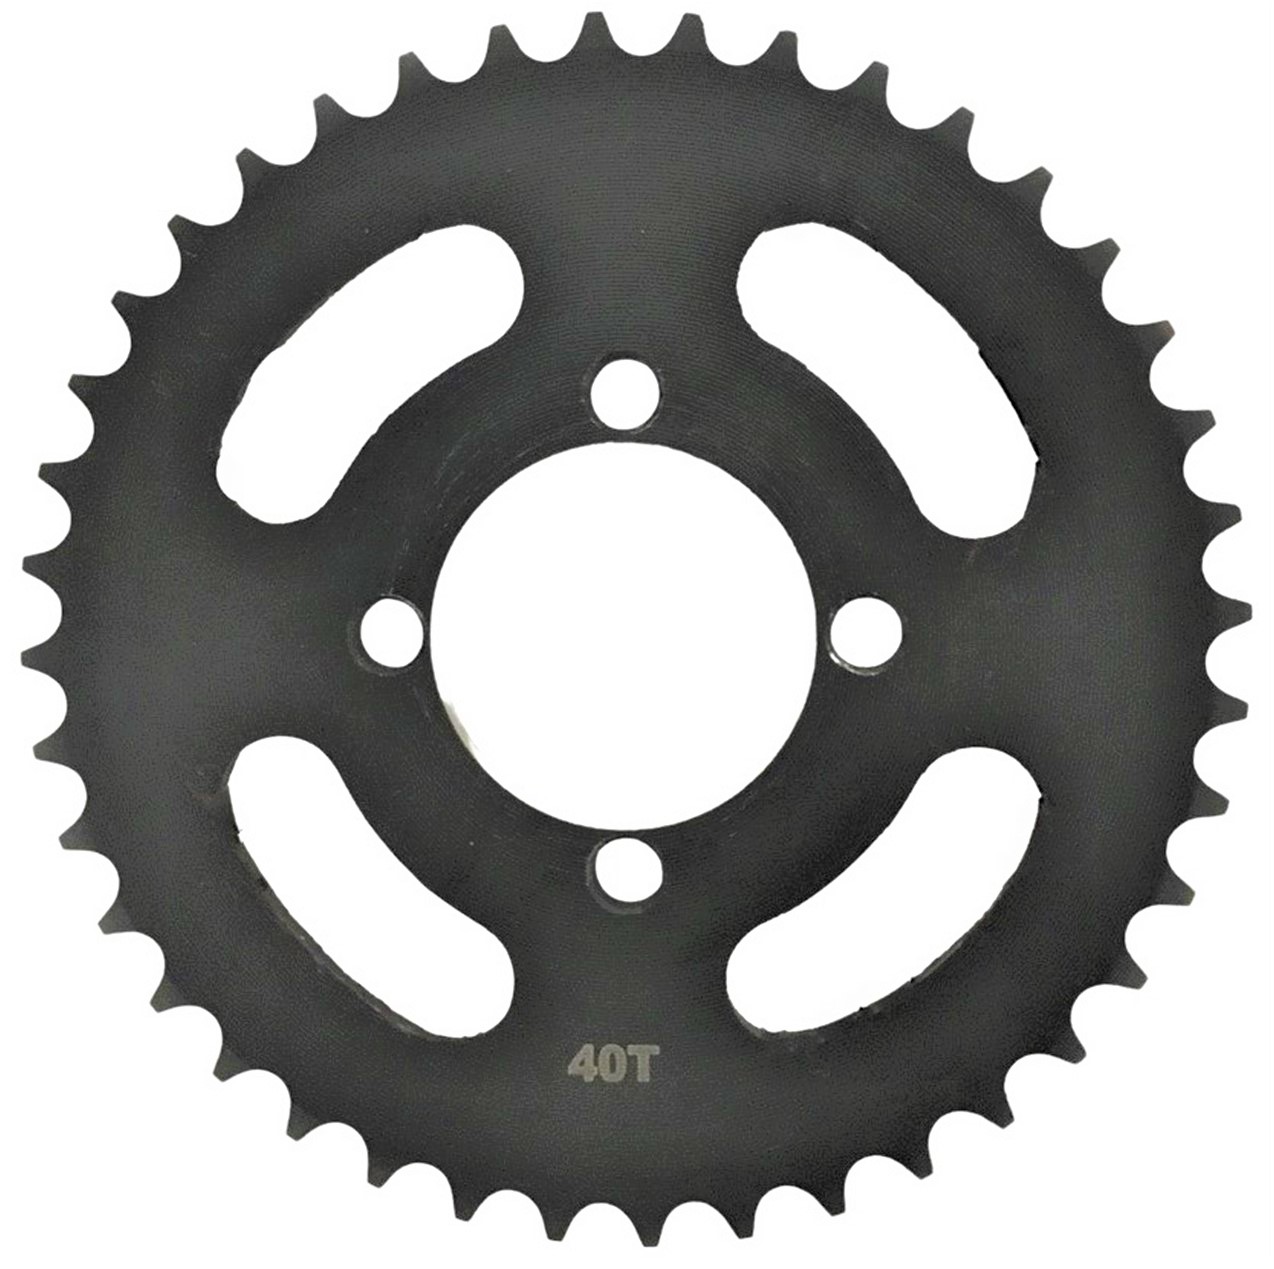 Rear Sprocket #35 40TH Fits Coleman CK100, GK80, Motovox, + other small GoKarts